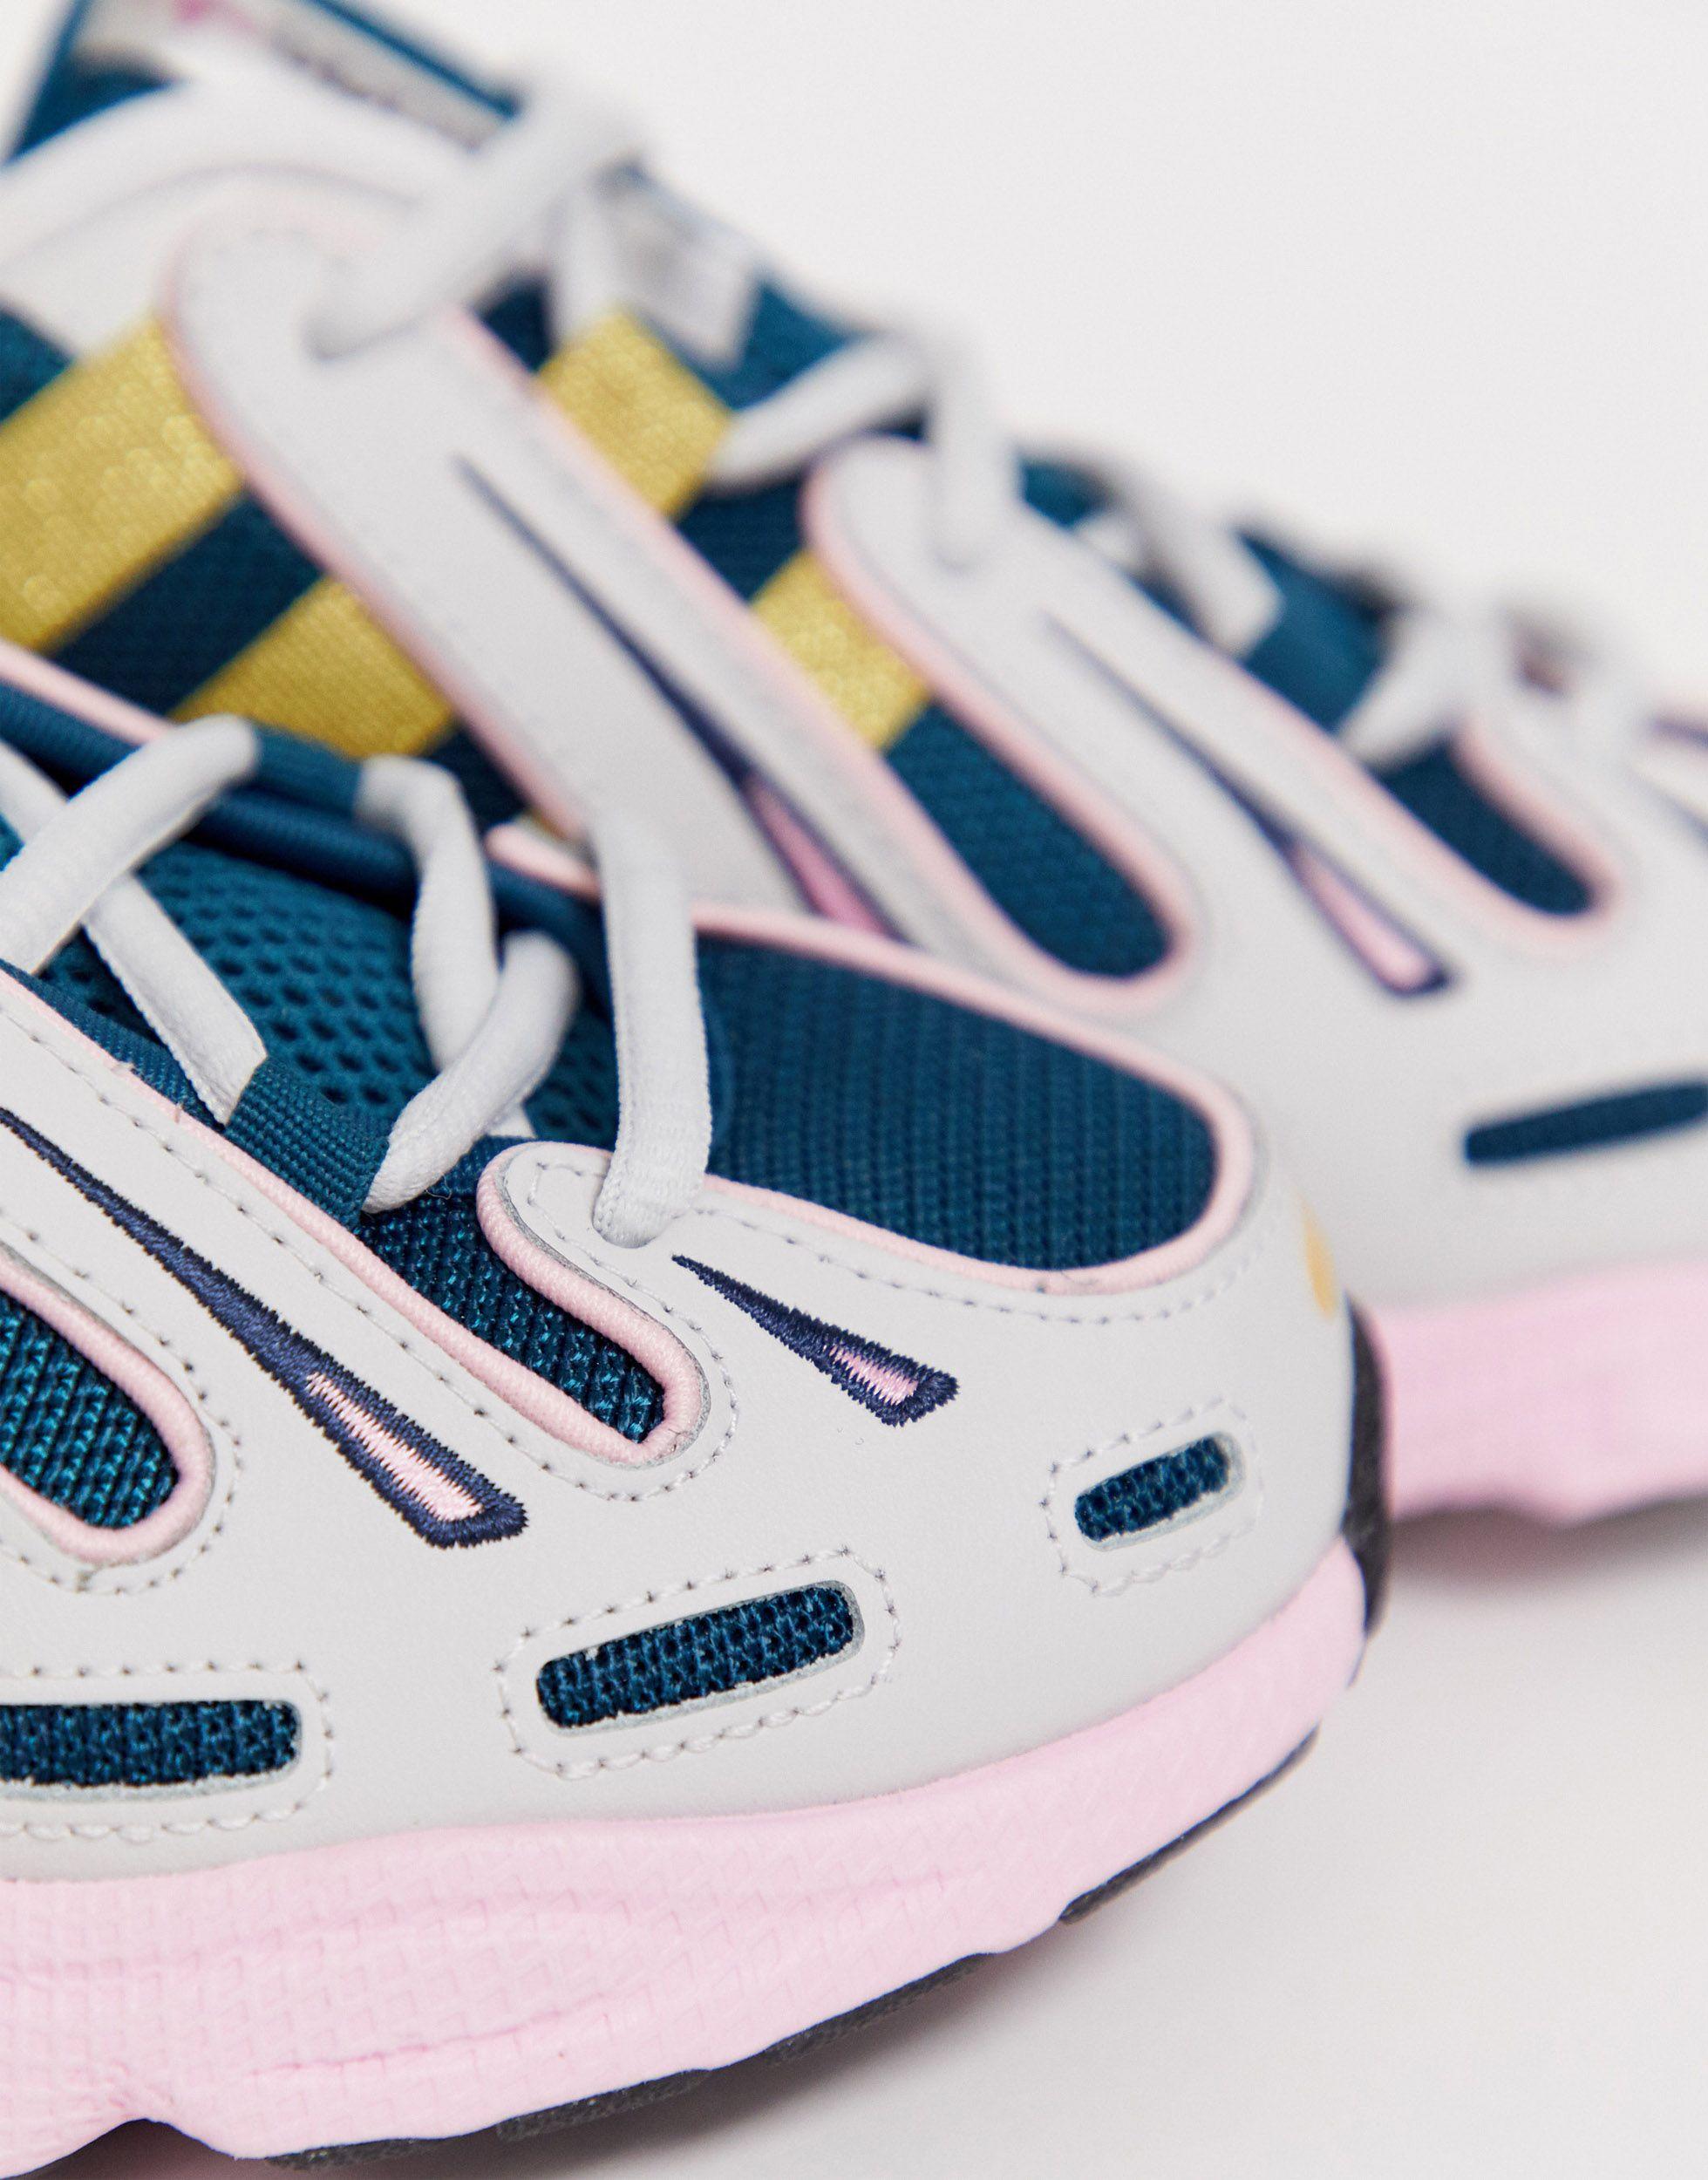 adidas originals eqt gazelle sneakers in navy and pink